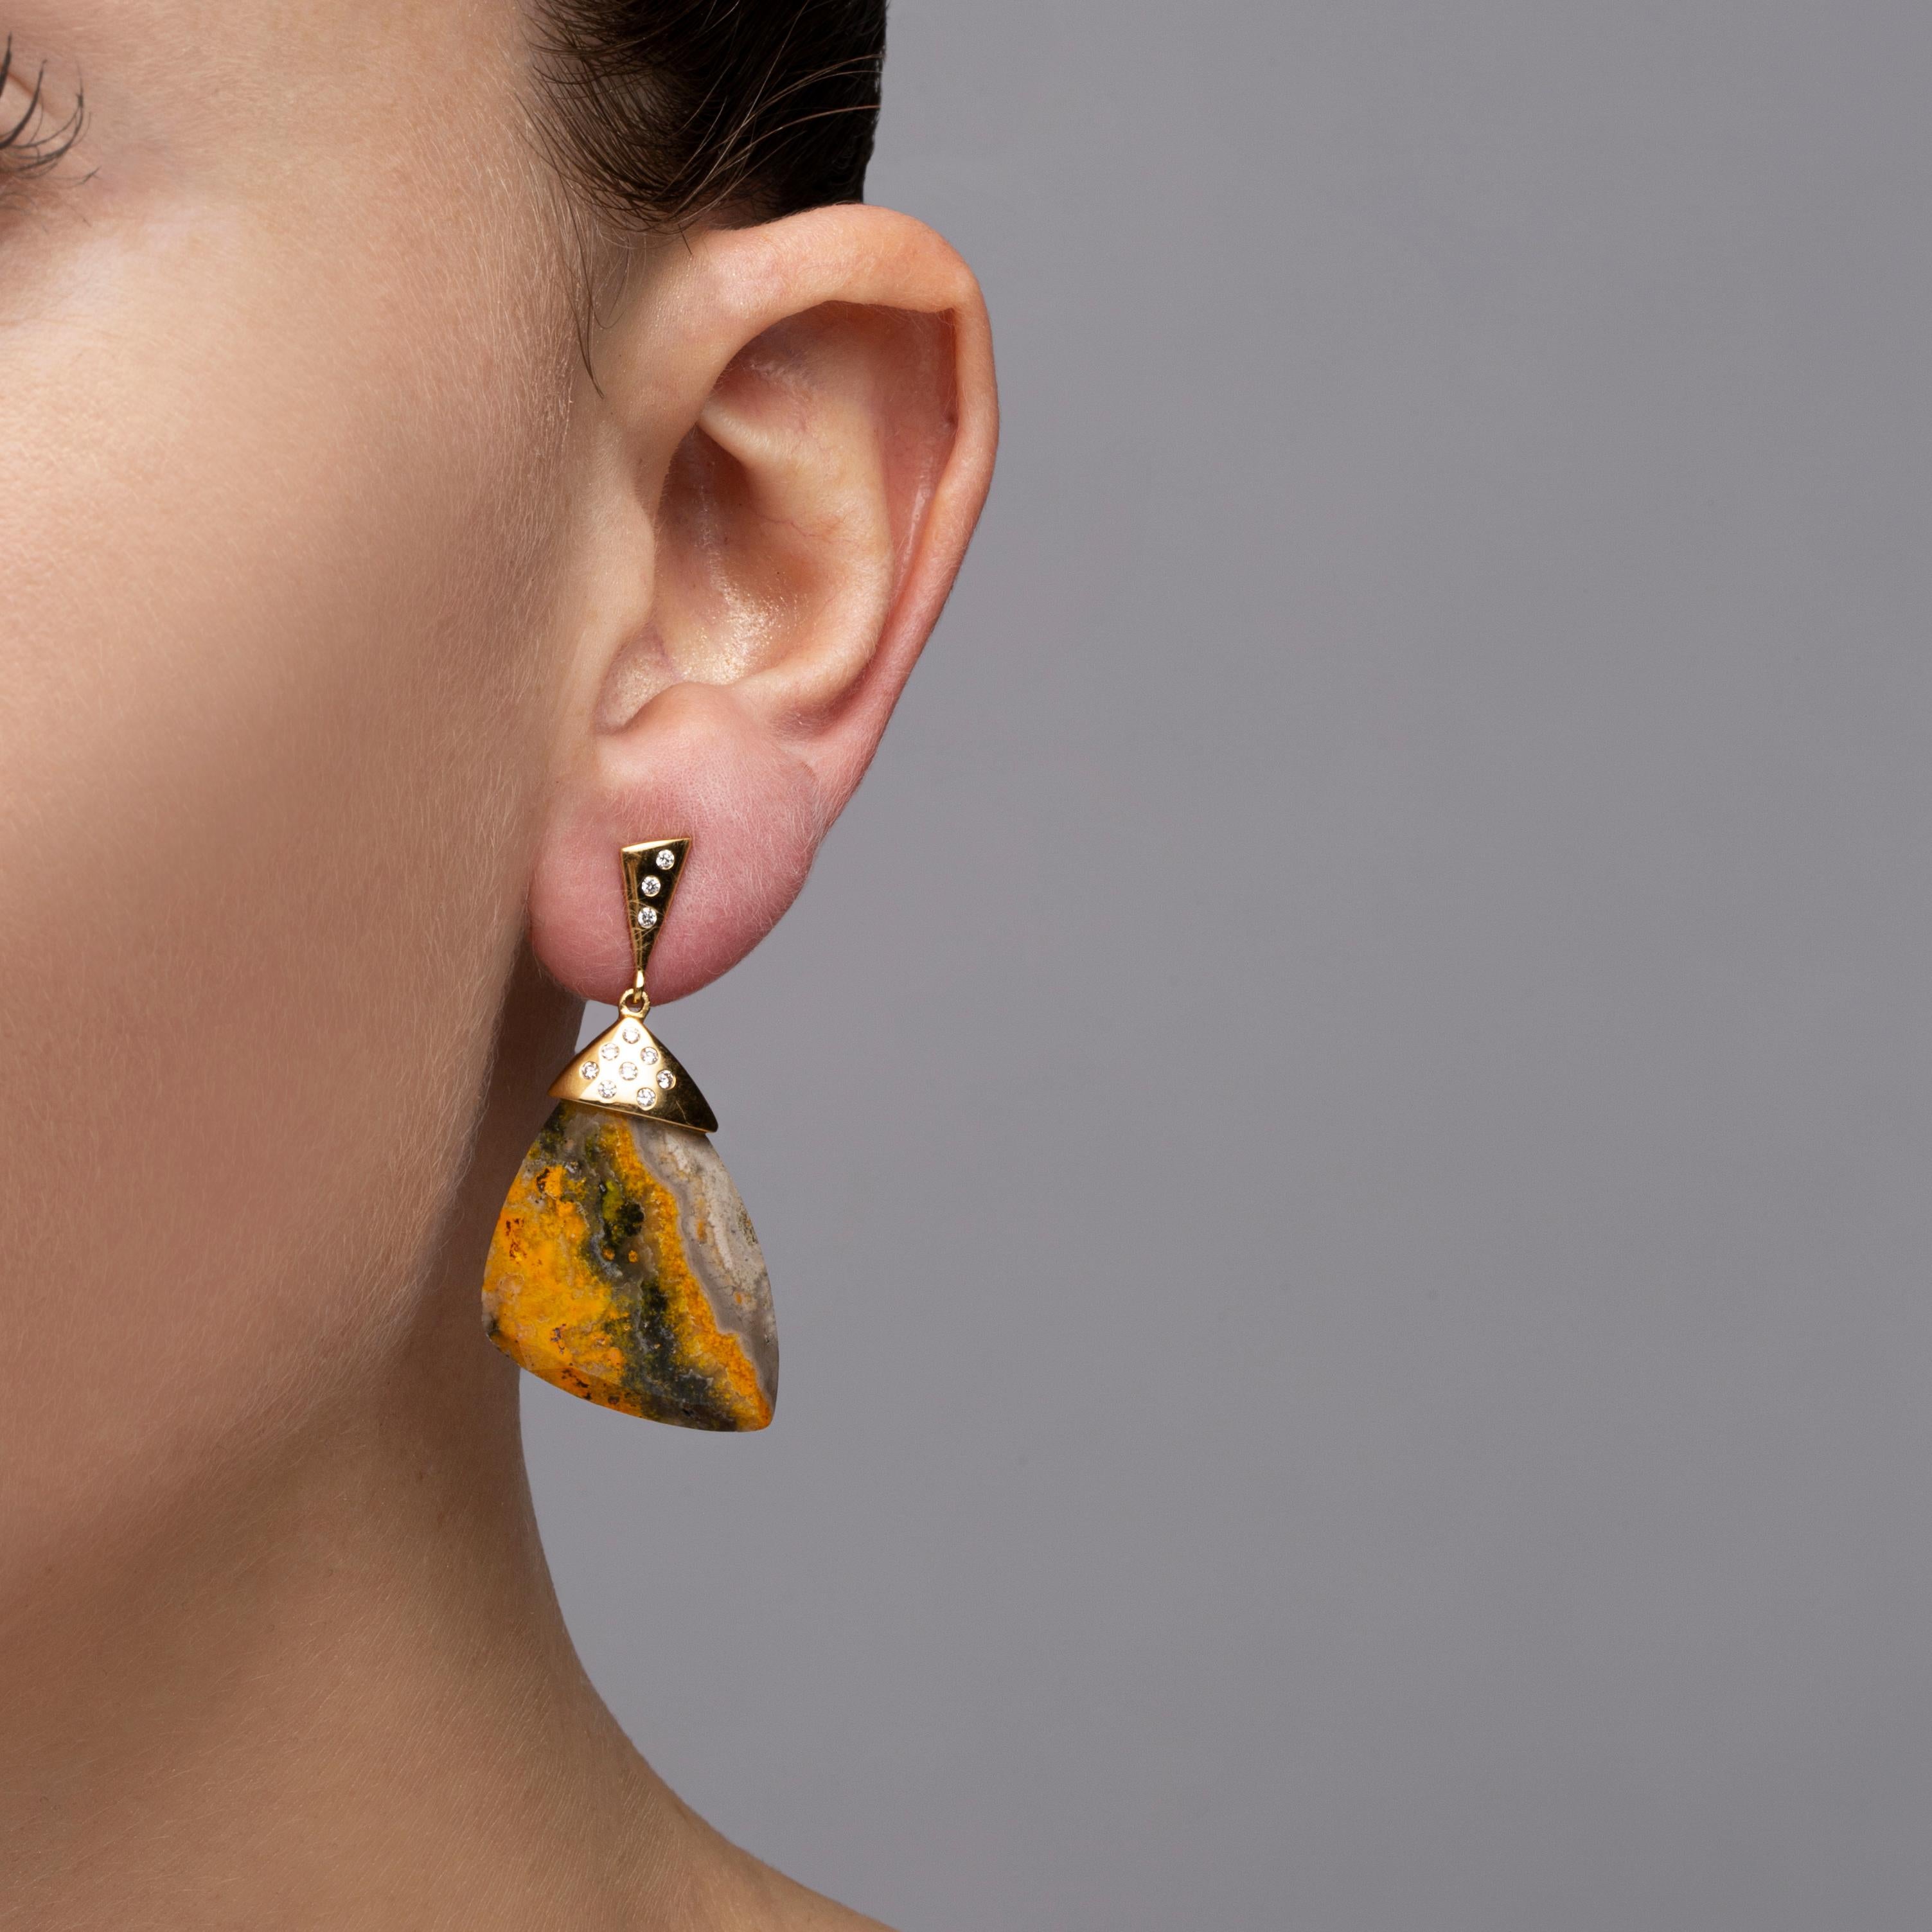 Alex Jona design collection, hand crafted in Italy, Bumblebee Jasper and 18 karat yellow gold dangling ear pendants set with 0.28 carats of white diamonds.

Alex Jona jewels stand out, not only for their special design and for the excellent quality